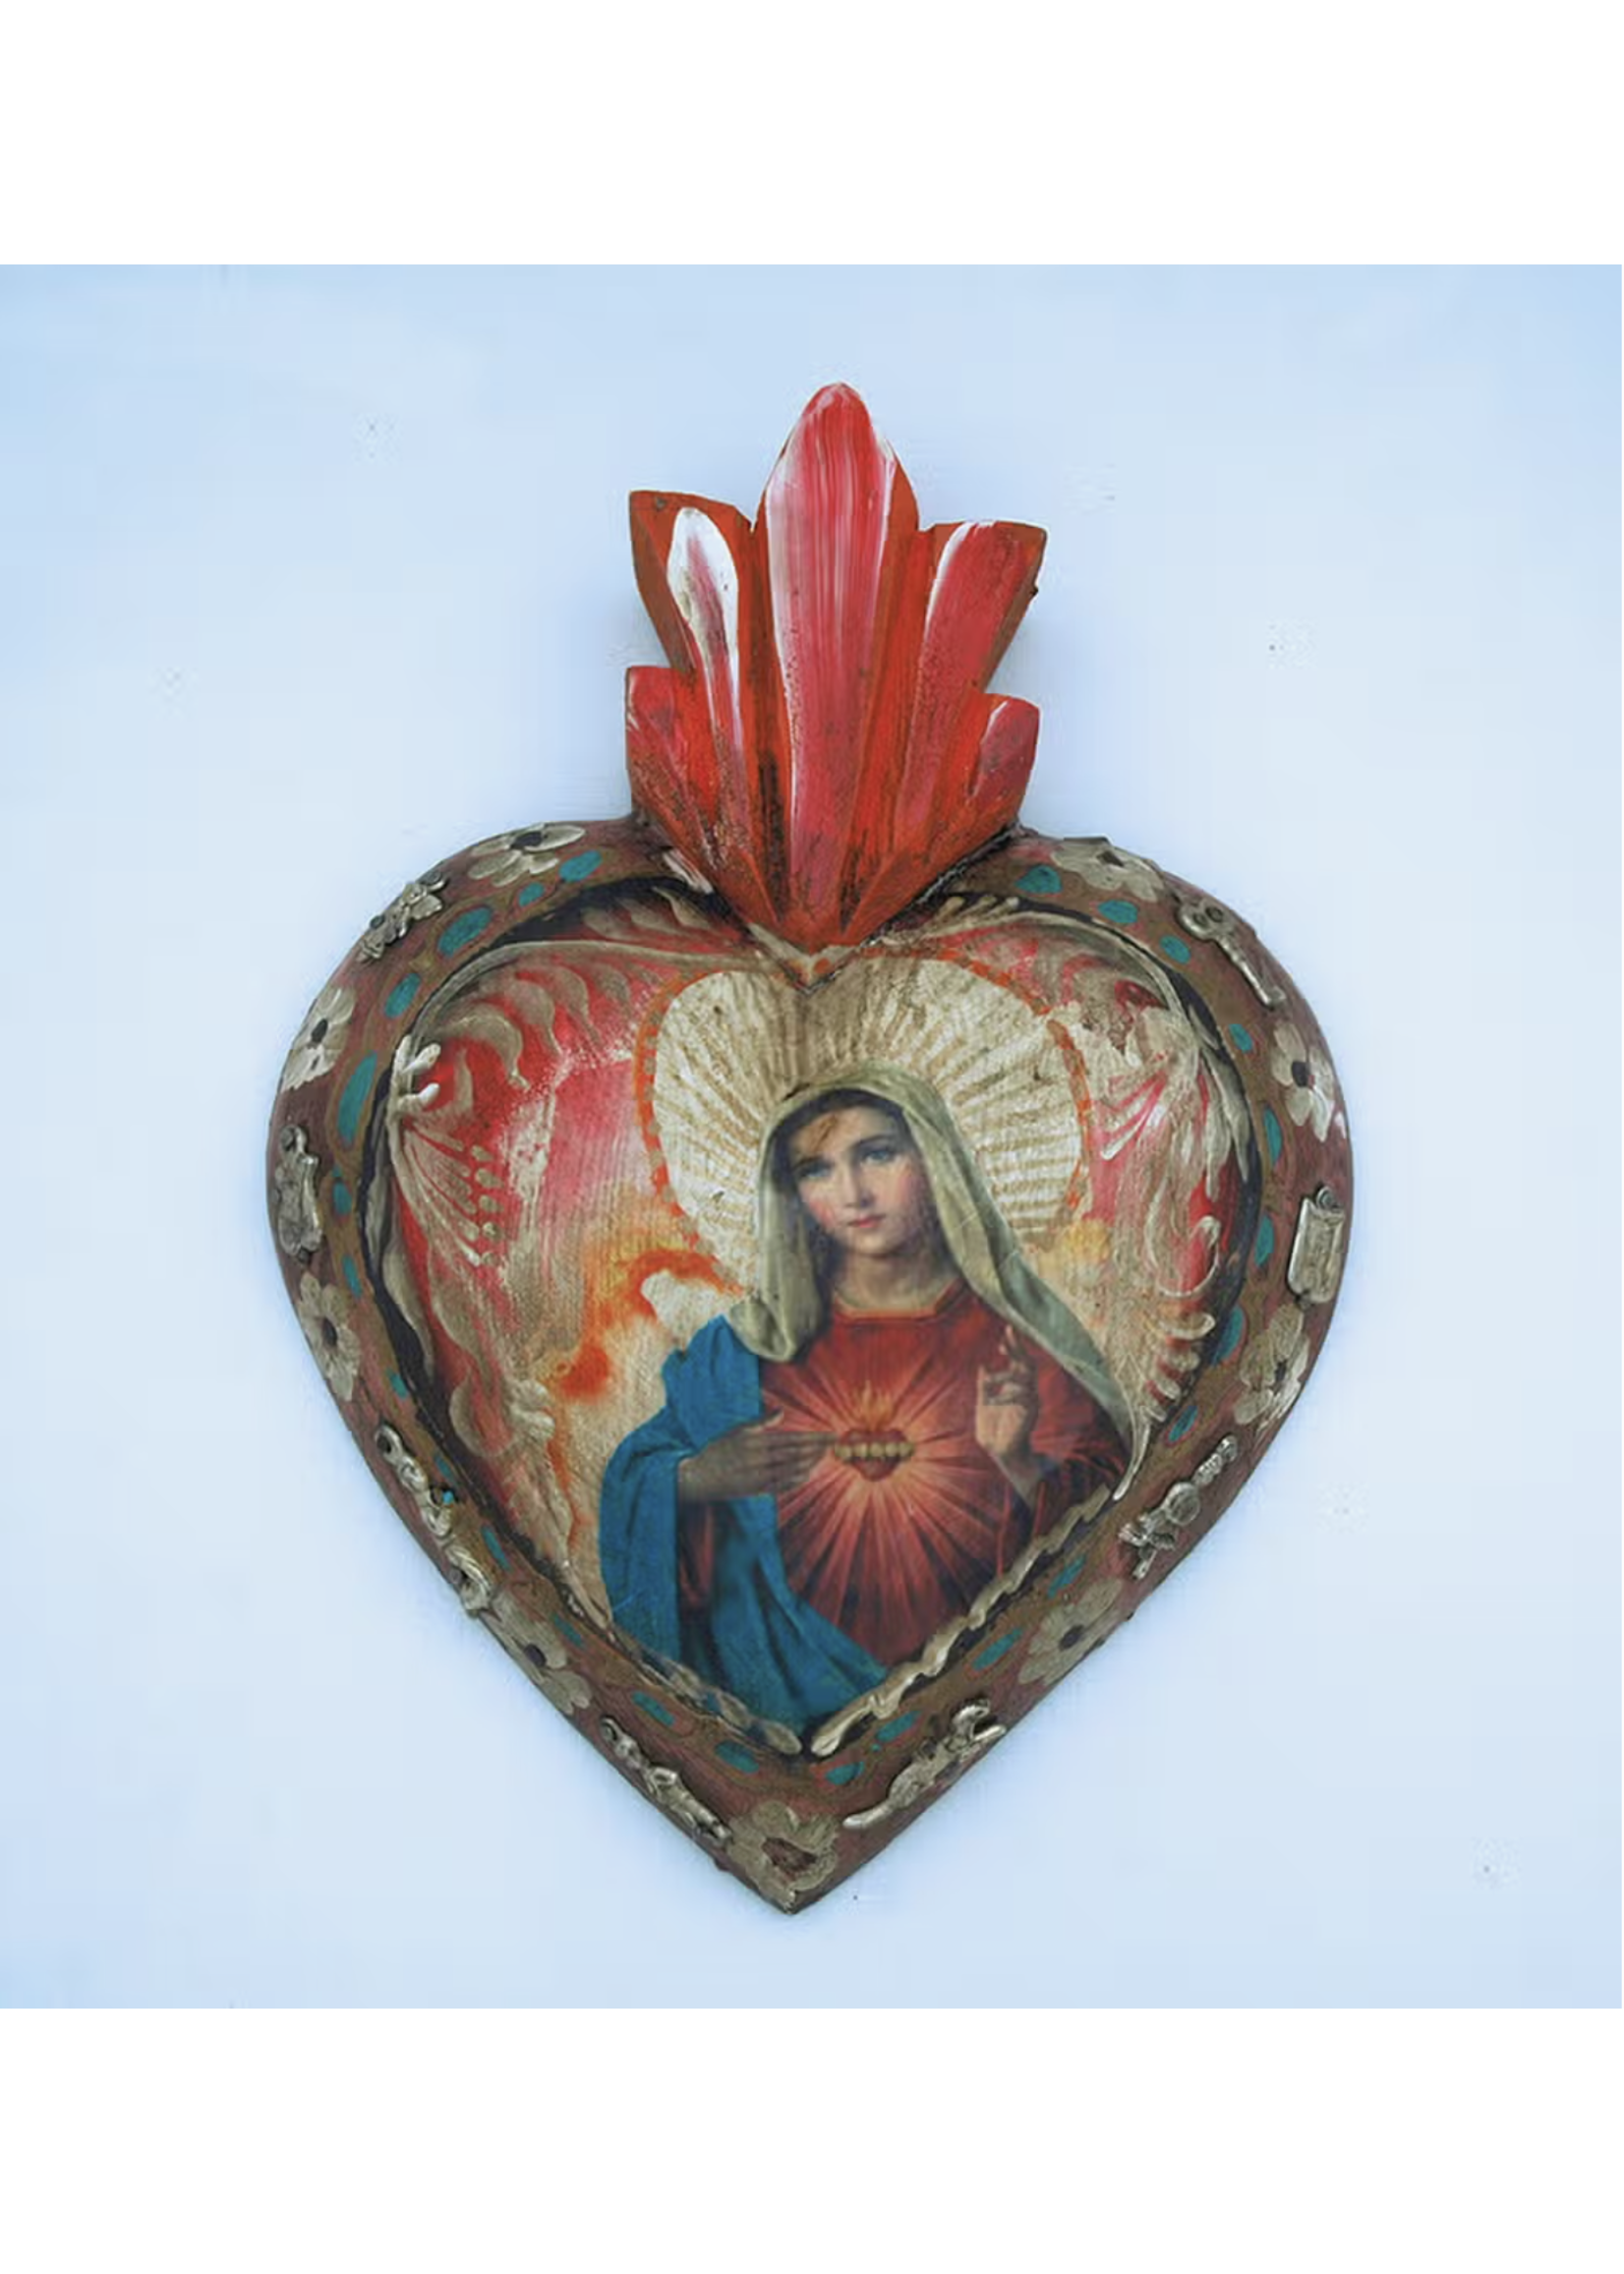 Immaculate Heart of Mary hand painted wood heart